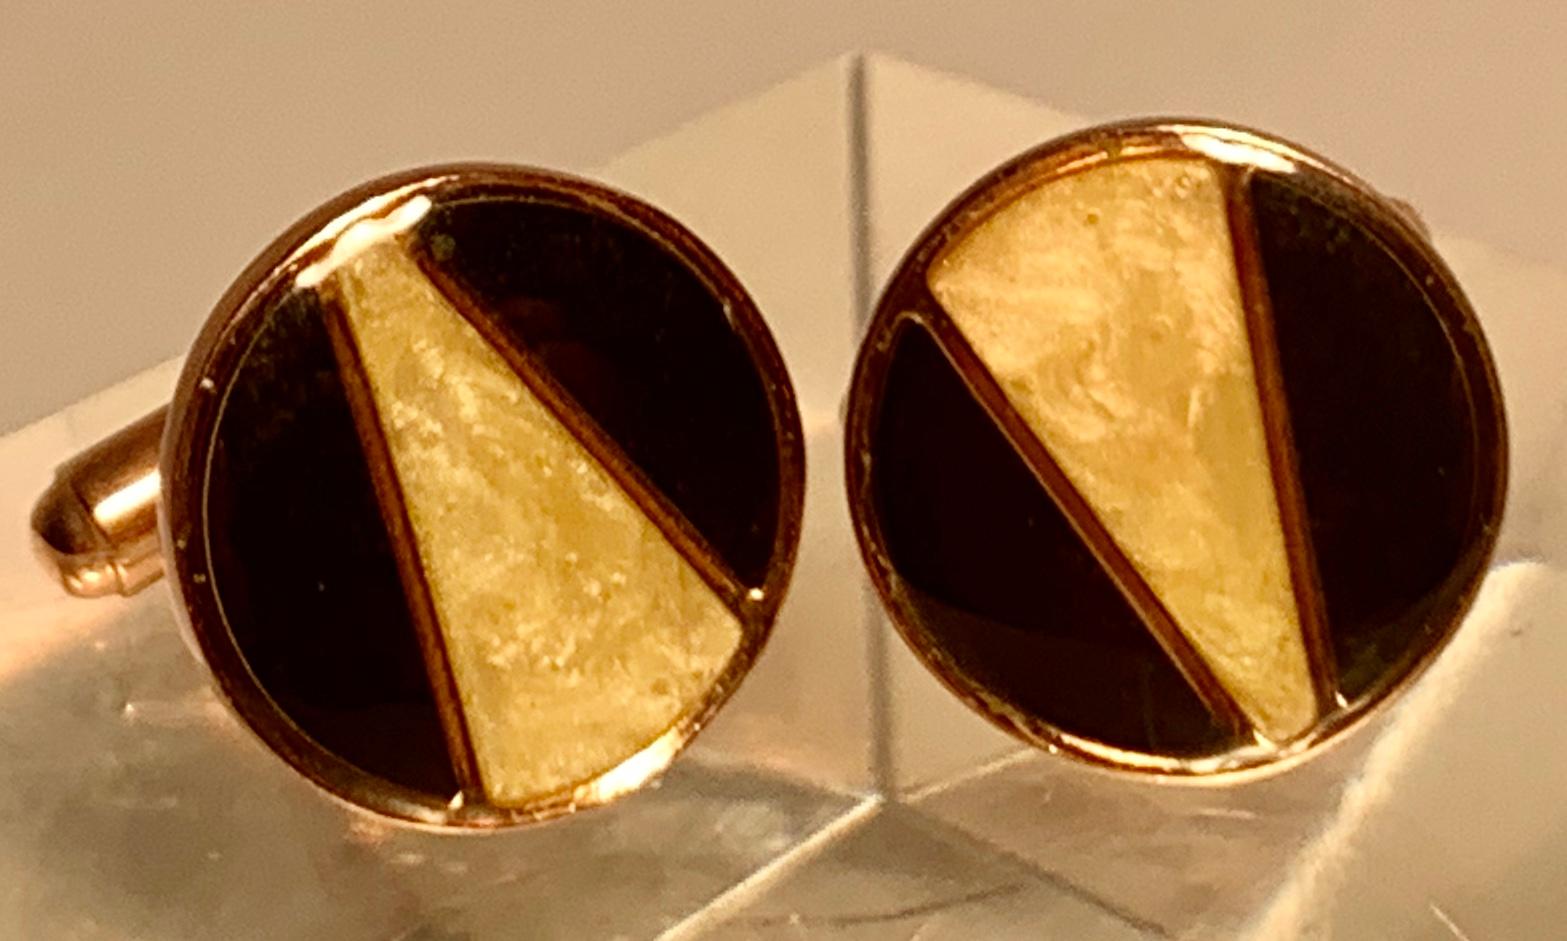 Pair of Art deco style cufflinks with an angular black and cream motif.  The gold filled setting has a T-bar style closure for ease of placing through a French cuff shirt.
Diameter-5/8